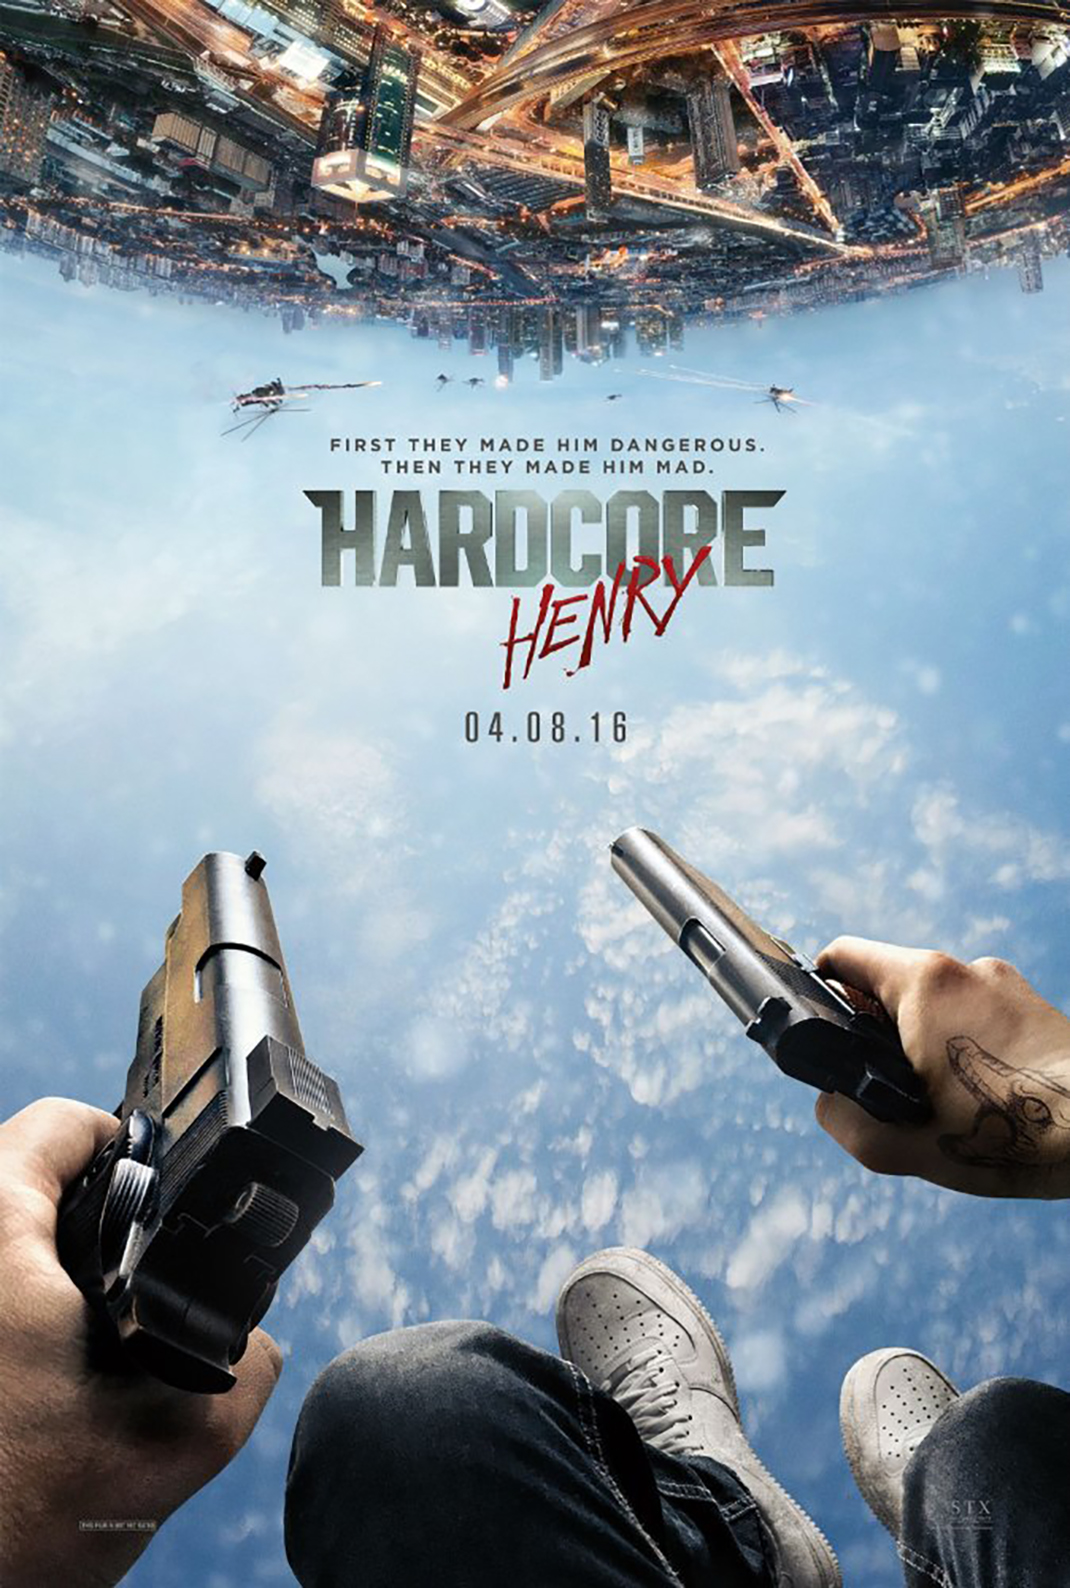 Harcore Henry1